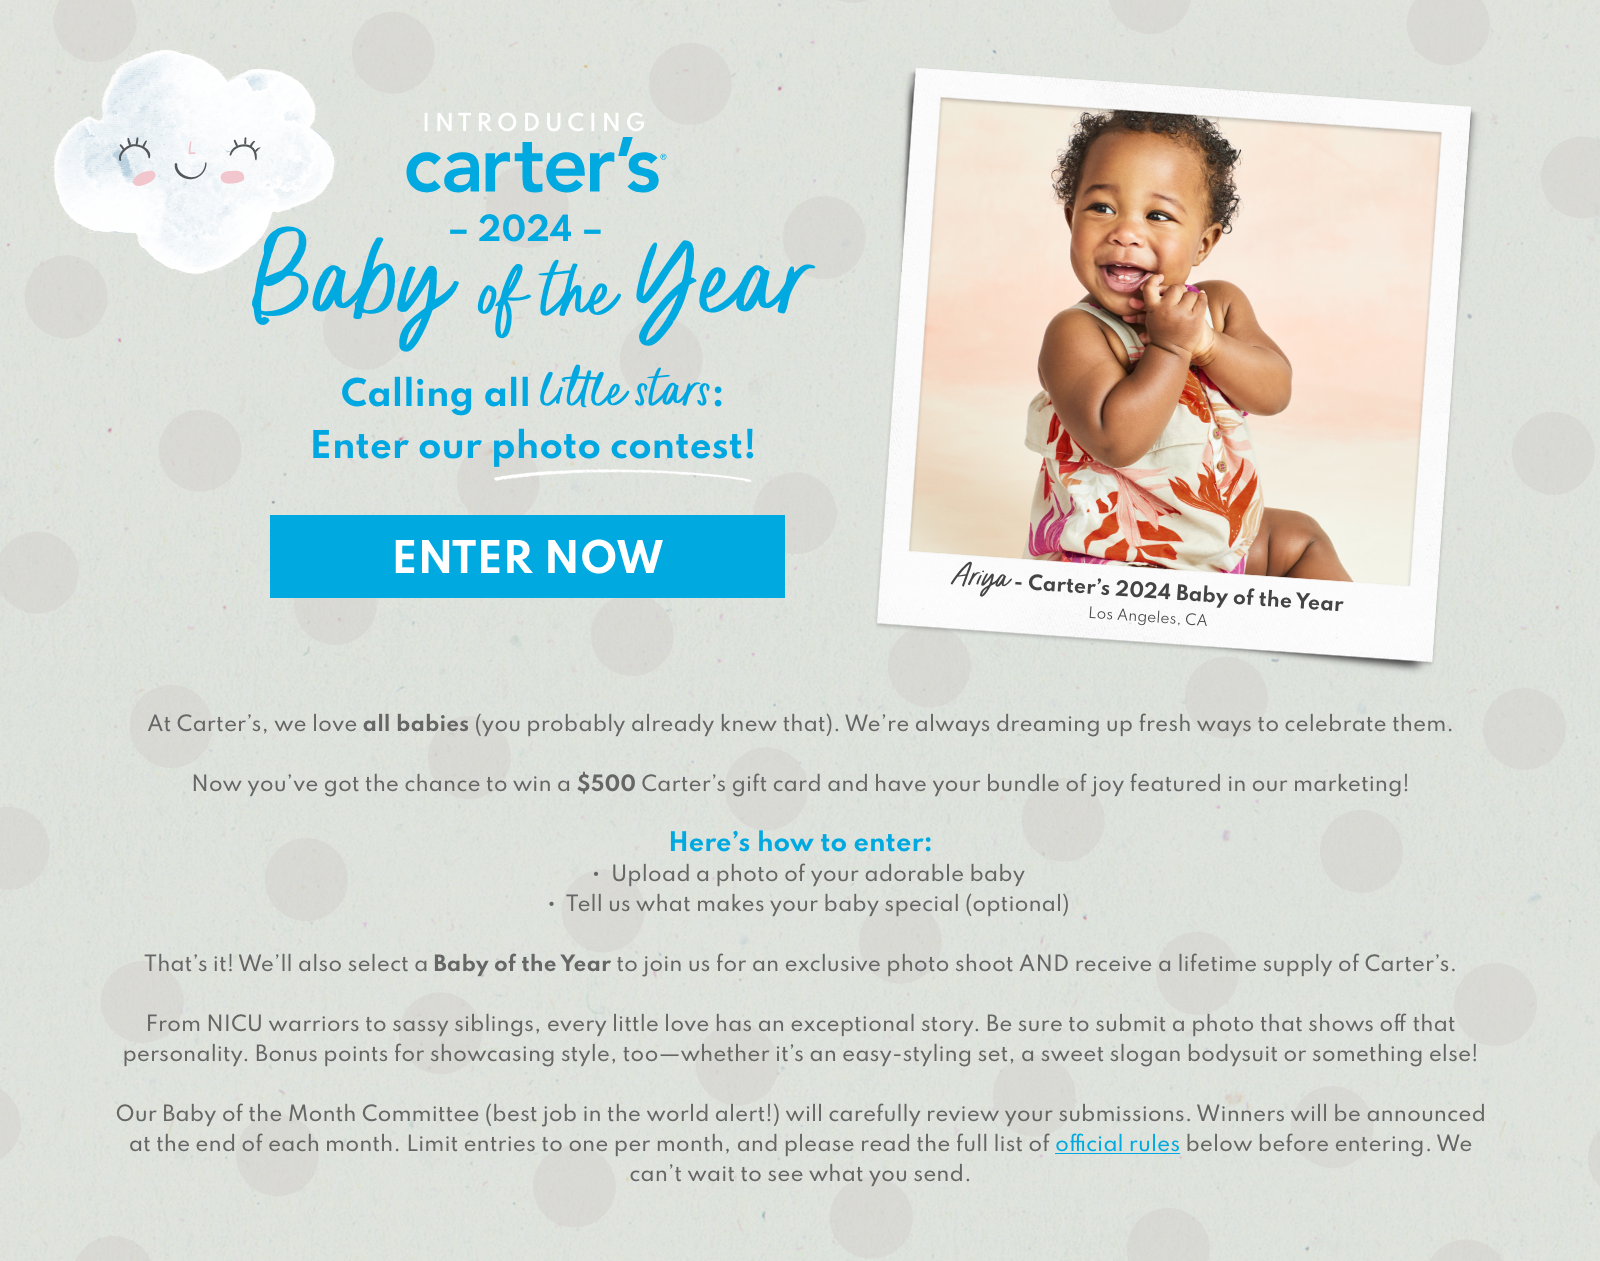 INTRODUCING carter’s® Baby of the Month | Think you have the most special baby in the world? So do we. | At Carter’s, we love all babies (you probably already knew that). We’re always dreaming up fresh ways to celebrate them. Now you’ve got the chance to win a $500 Carter’s gift card and have your bundle of joy featured in our marketing! Here’s how to enter: ▪ Upload a photo of your adorable baby ▪ Tell us what makes your baby special (optional) That’s it! We’ll also select a Baby of the Year to join us for an exclusive photo shoot AND receive a lifetime supply of Carter’s. From NICU warriors to sassy siblings, every little love has an exceptional story. Be sure to submit a photo that shows off that personality. Bonus points for showcasing style, too - whether it’s an easy-styling set, a sweet slogan bodysuit or something else! Our Baby of the Month Committee (best job in the world alert) will carefully review your submissions. Winners will be announced at the end of each month. Limit entries to one per month, and please read the full list of official rules below before entering. We can’t wait to see what you send.